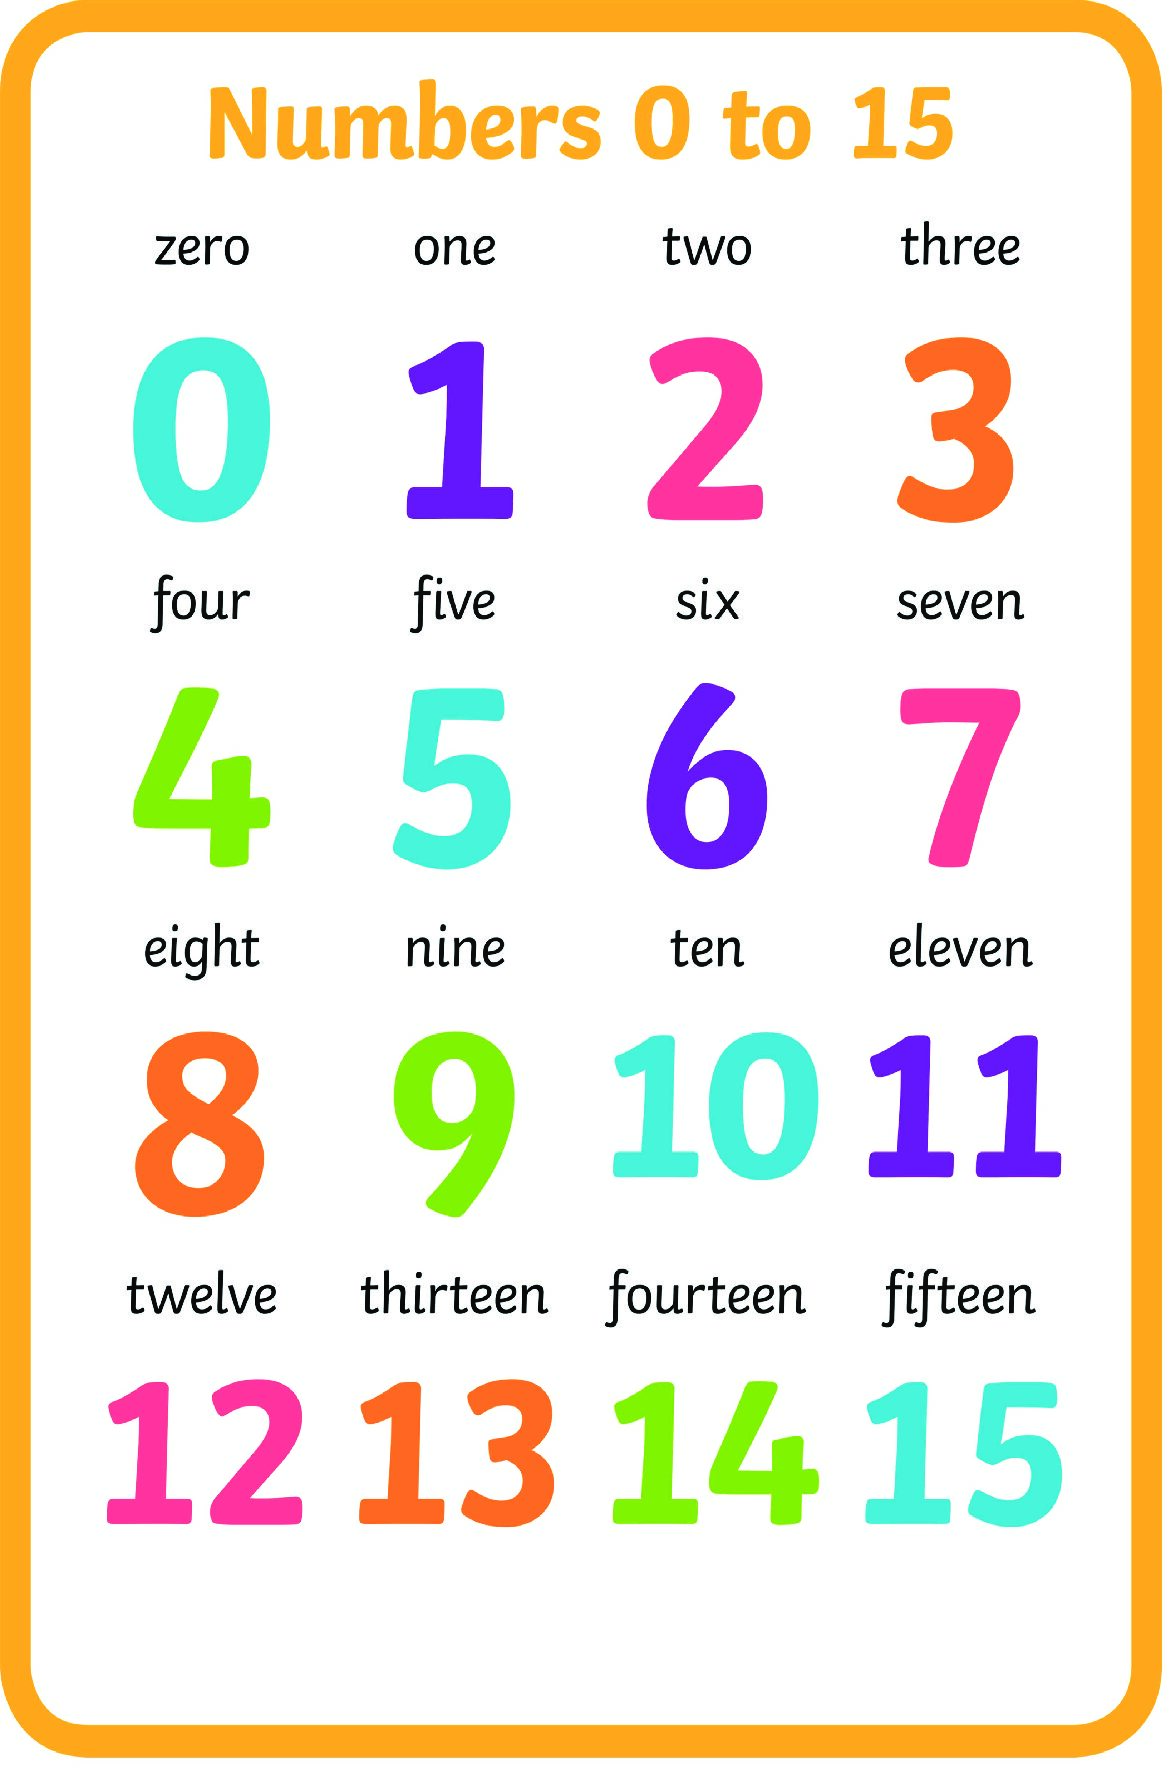 counting-numbers-0-15-white-background